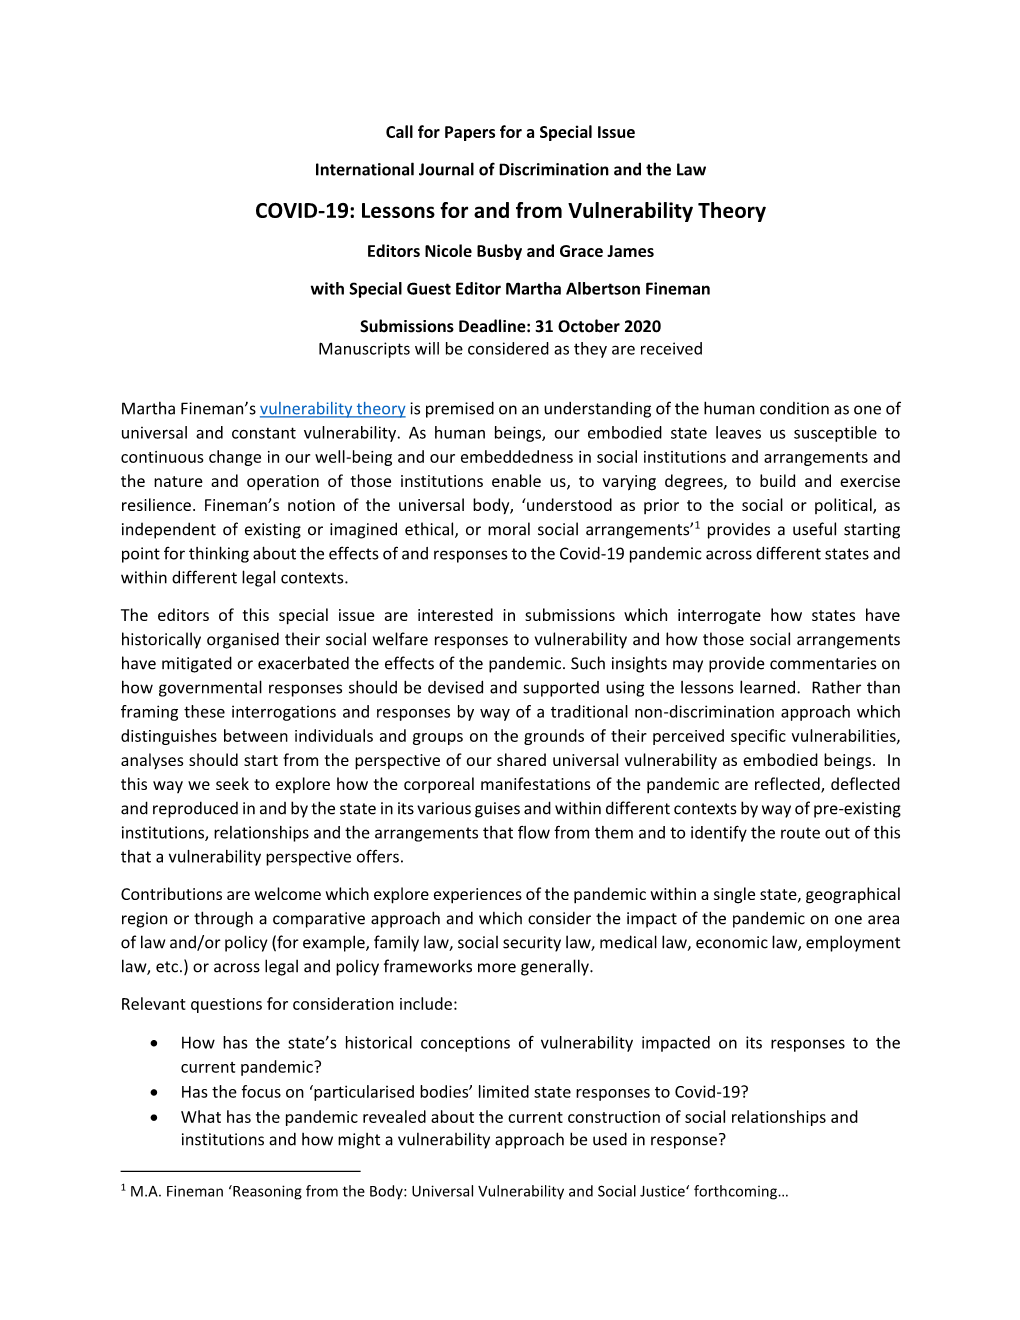 COVID-19: Lessons for and from Vulnerability Theory